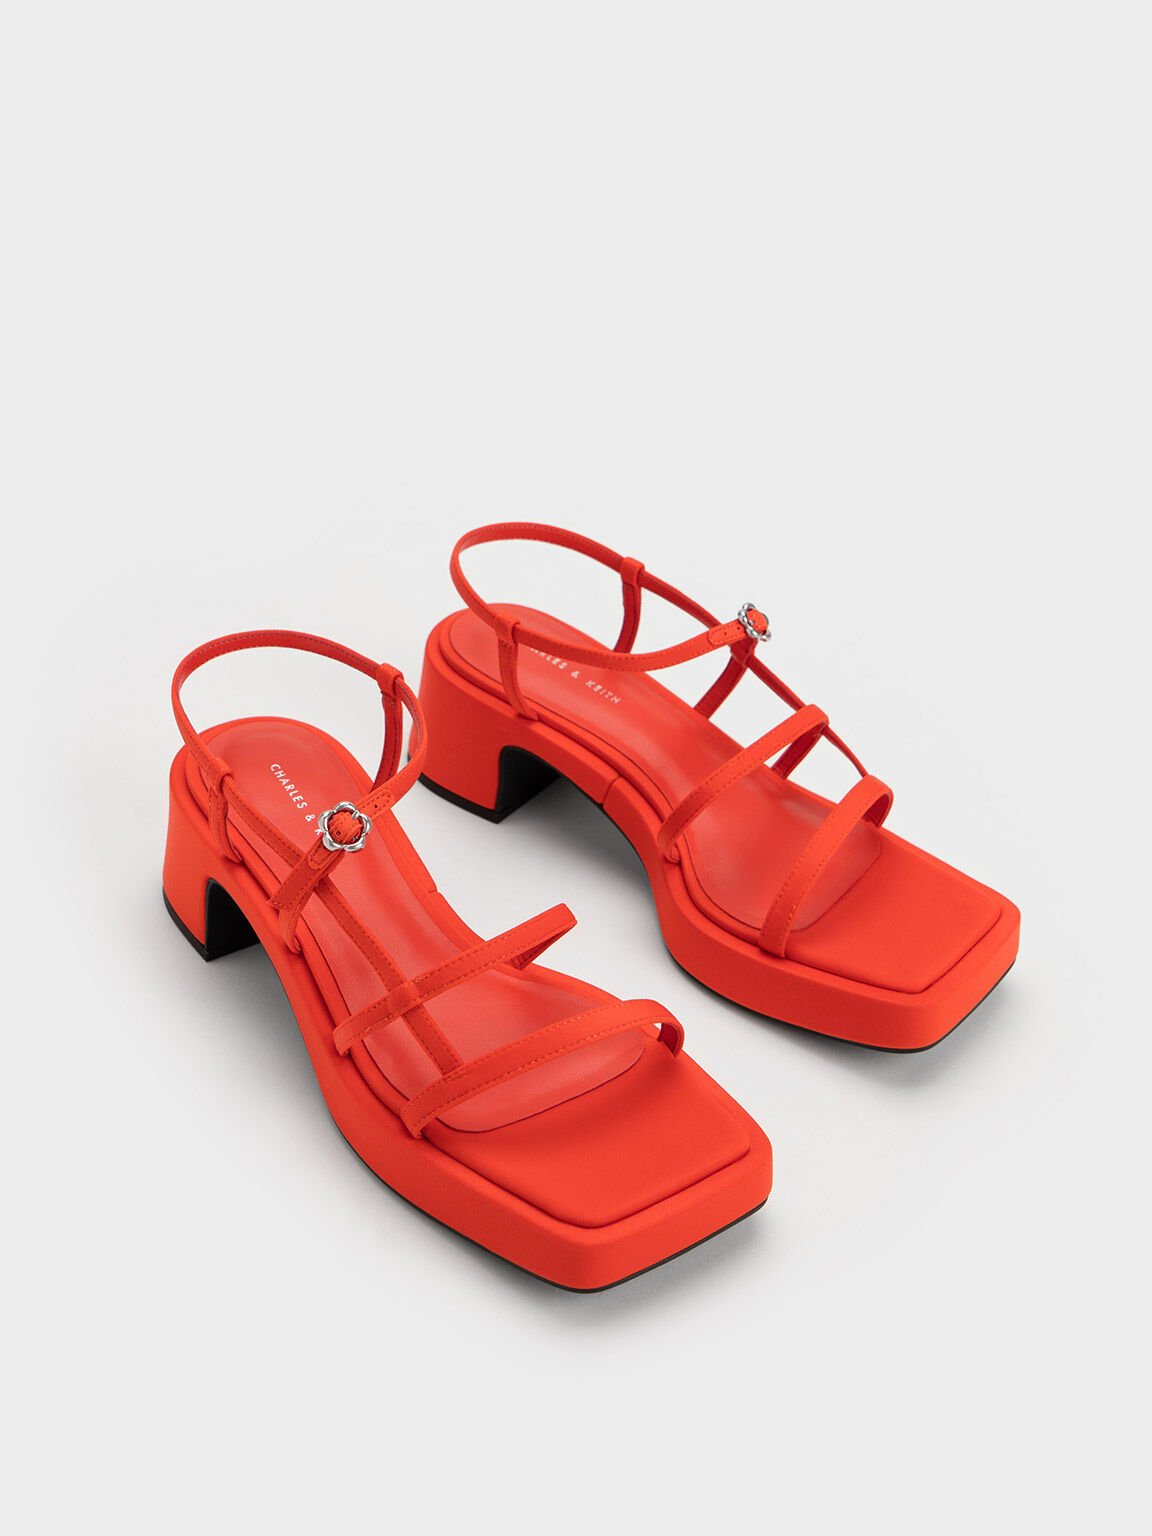 Flower-Buckle Strappy Sandals, Red, hi-res